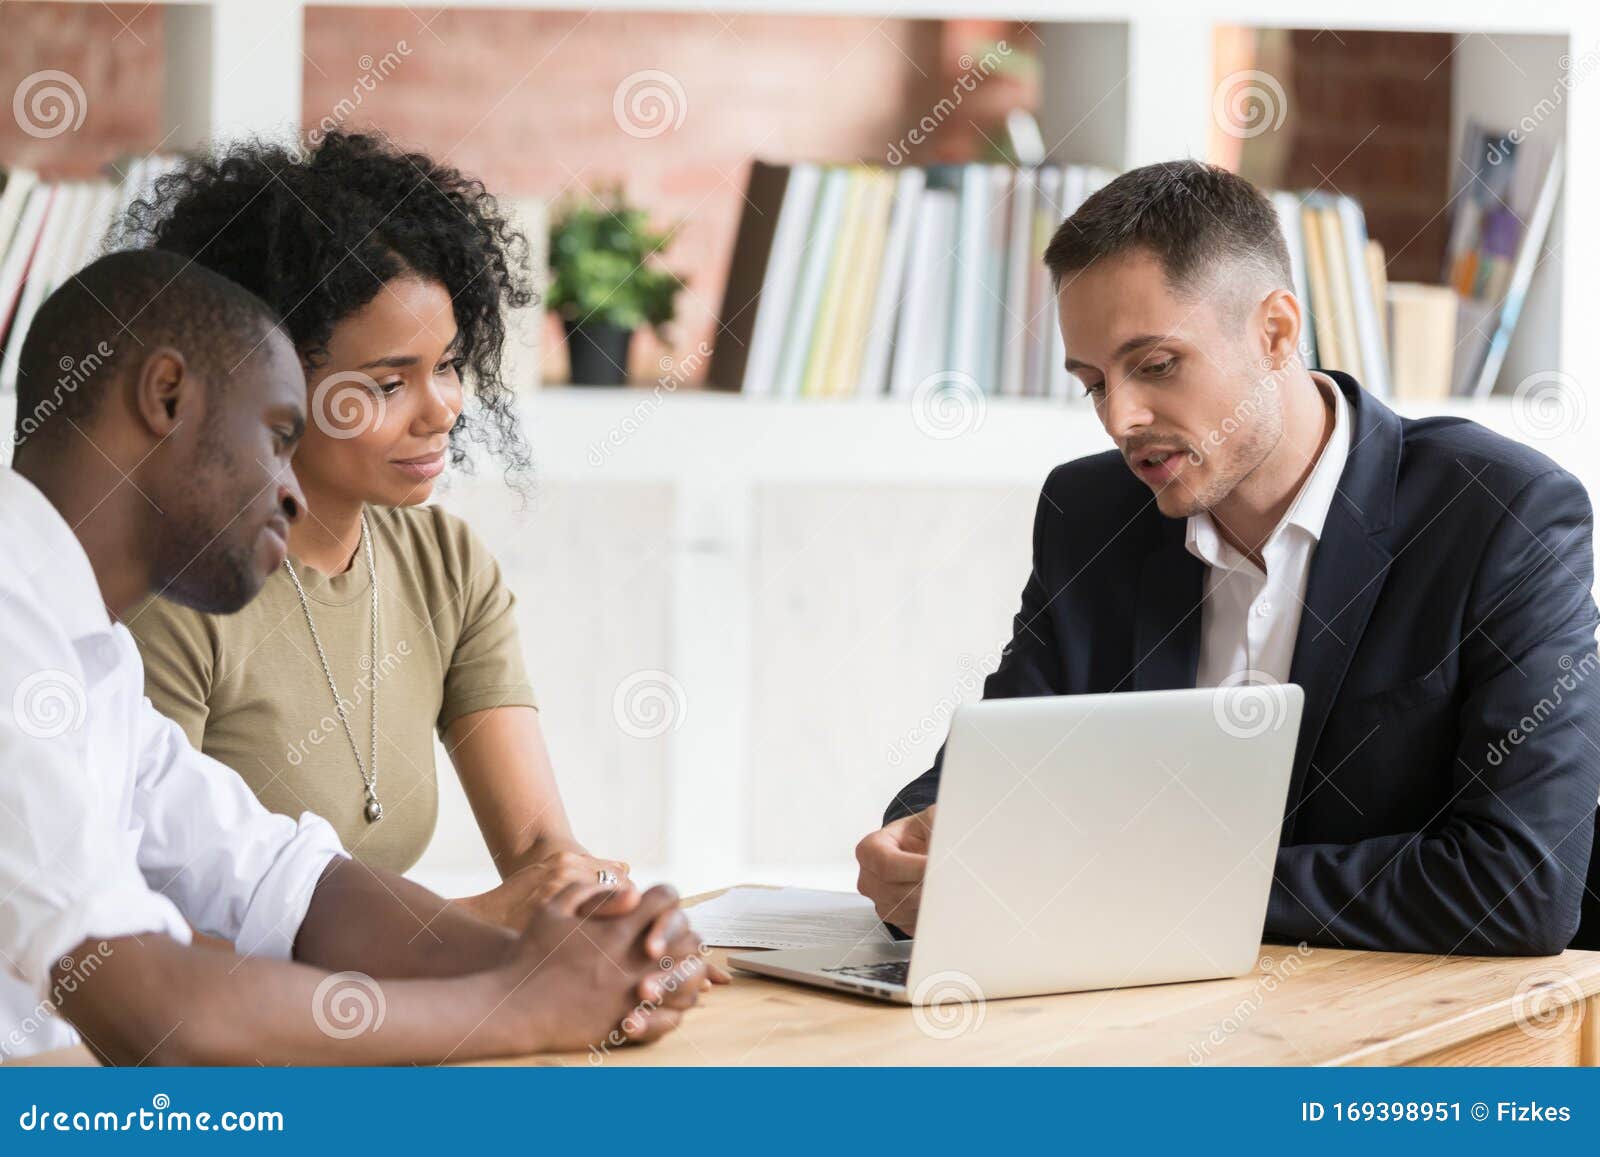 Caucasian Realtor Meeting With Clients Couple Show Houses At Laptop Stock Image Image Of 